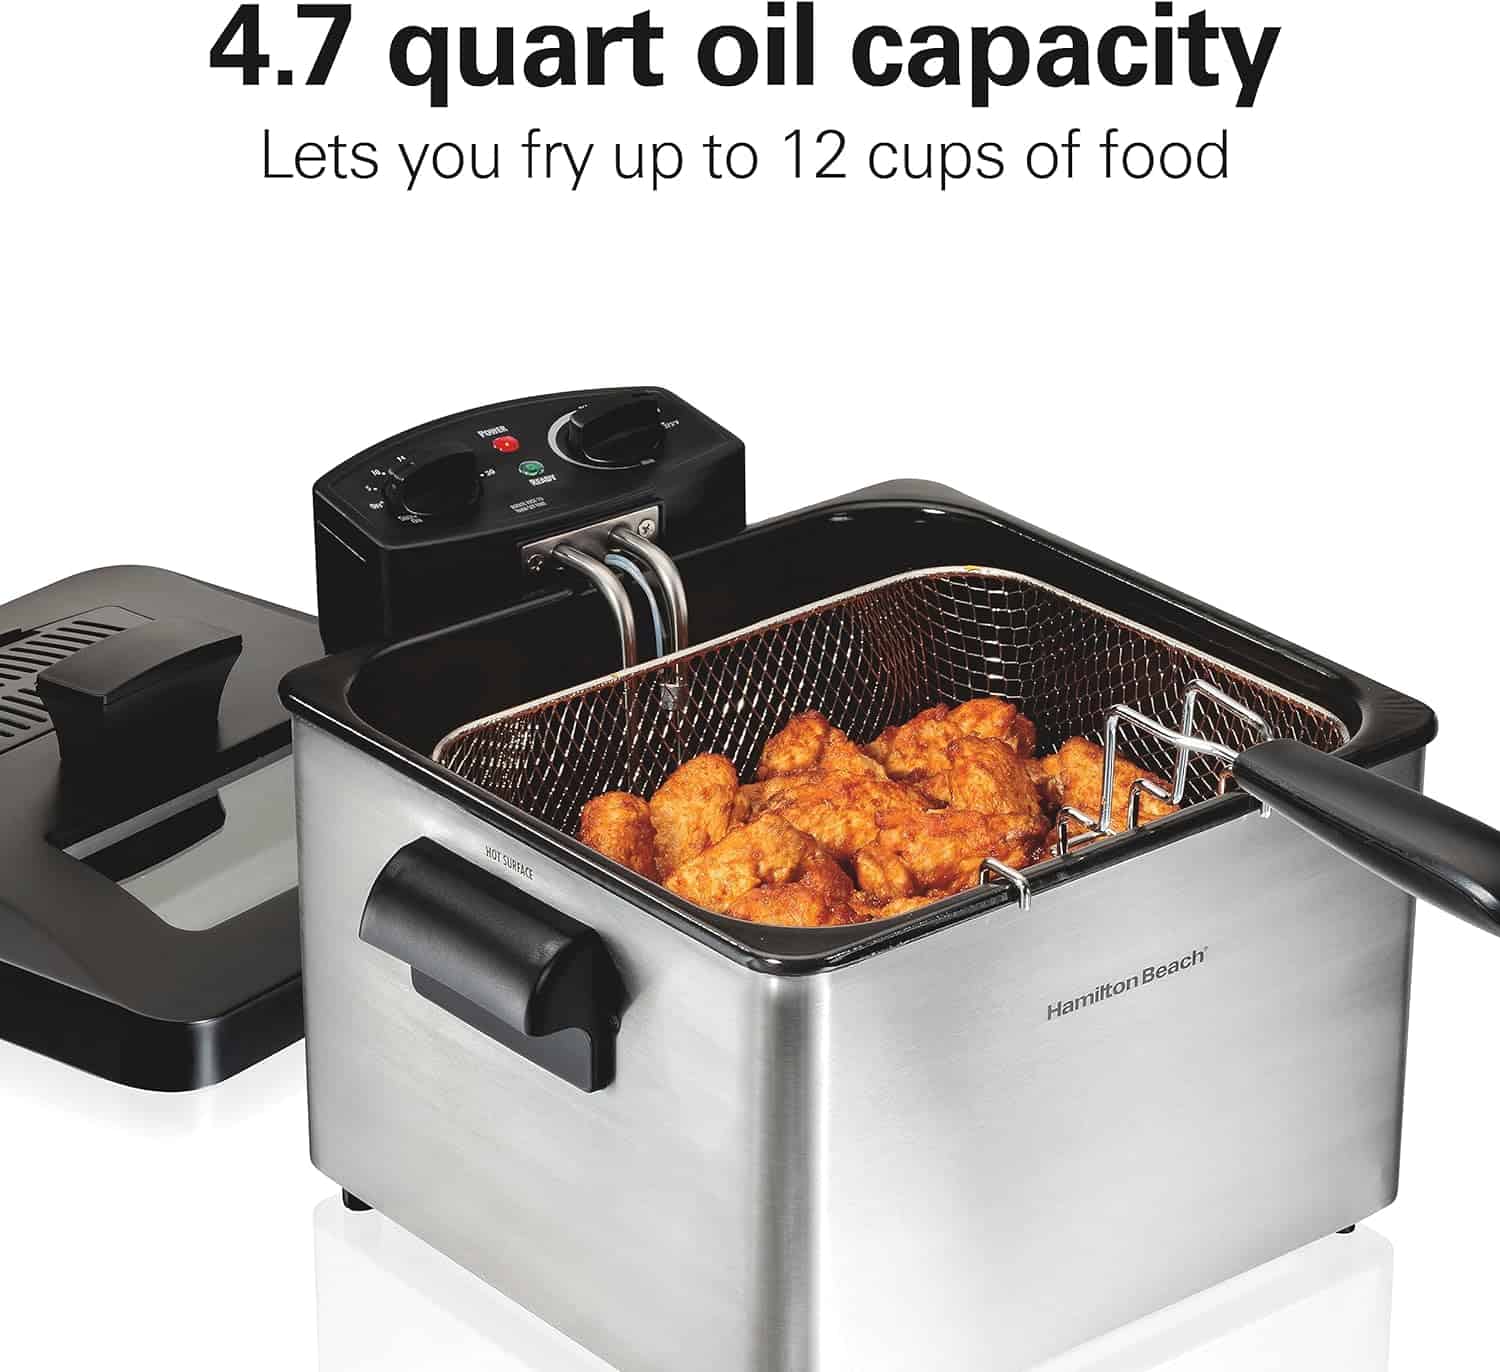 Hamilton-Beach-Triple-Basket-Electric-Deep-Fryer-4.7-Quarts-19-Cups-Oil-Capacity-Lid-with-View-Window-Professional-Style-1800-Watts-Stainless-Steel-35034